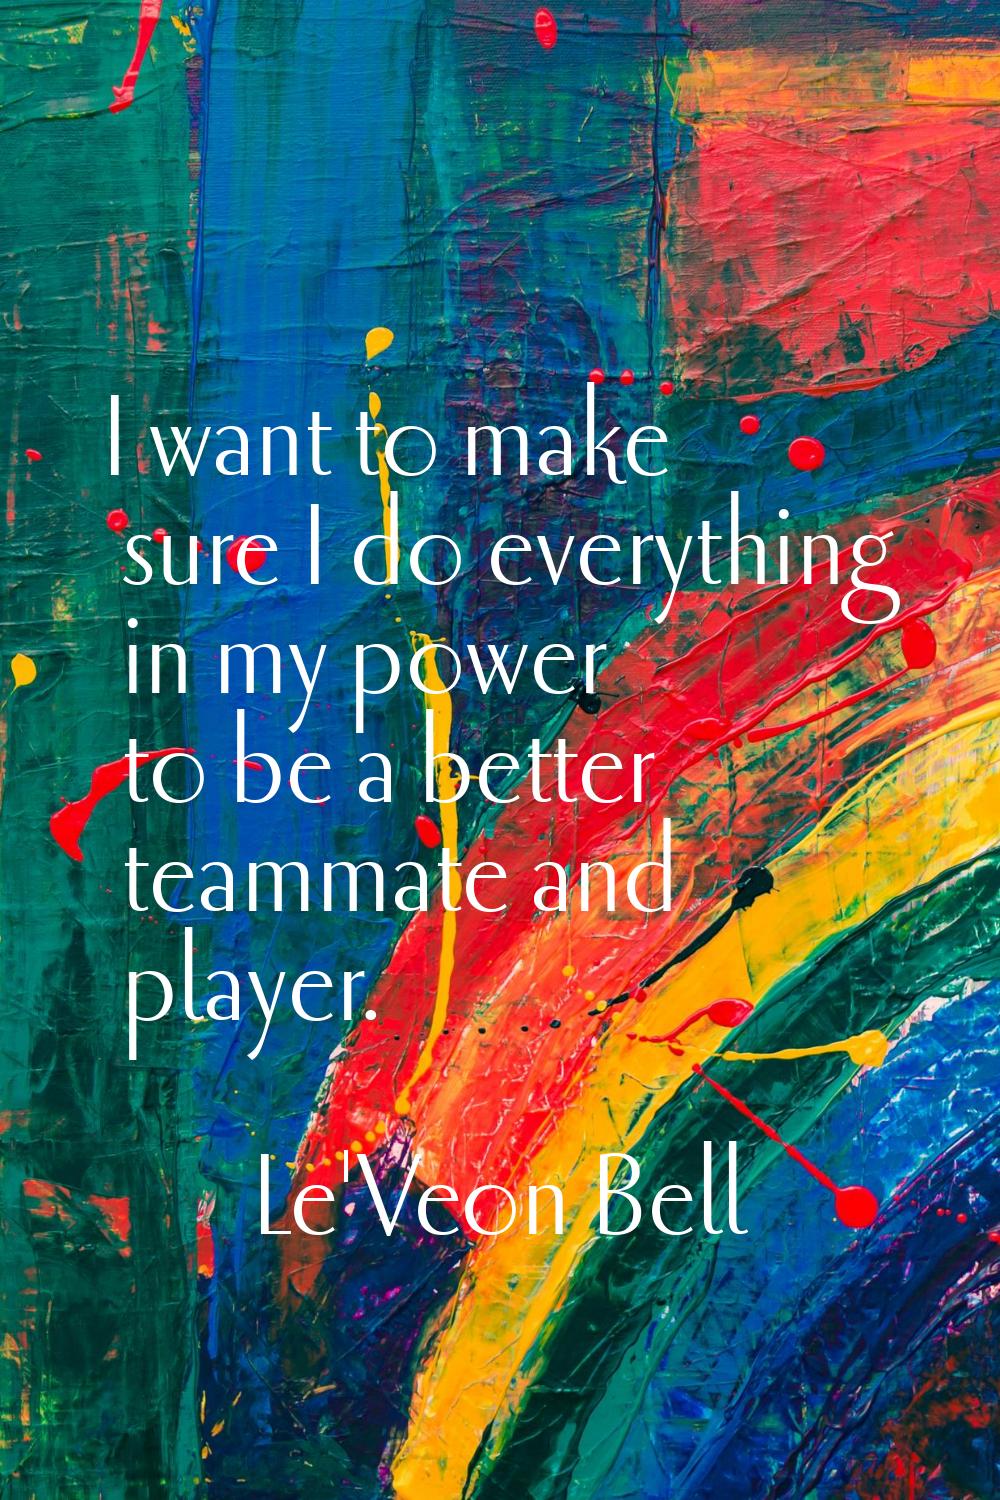 I want to make sure I do everything in my power to be a better teammate and player.